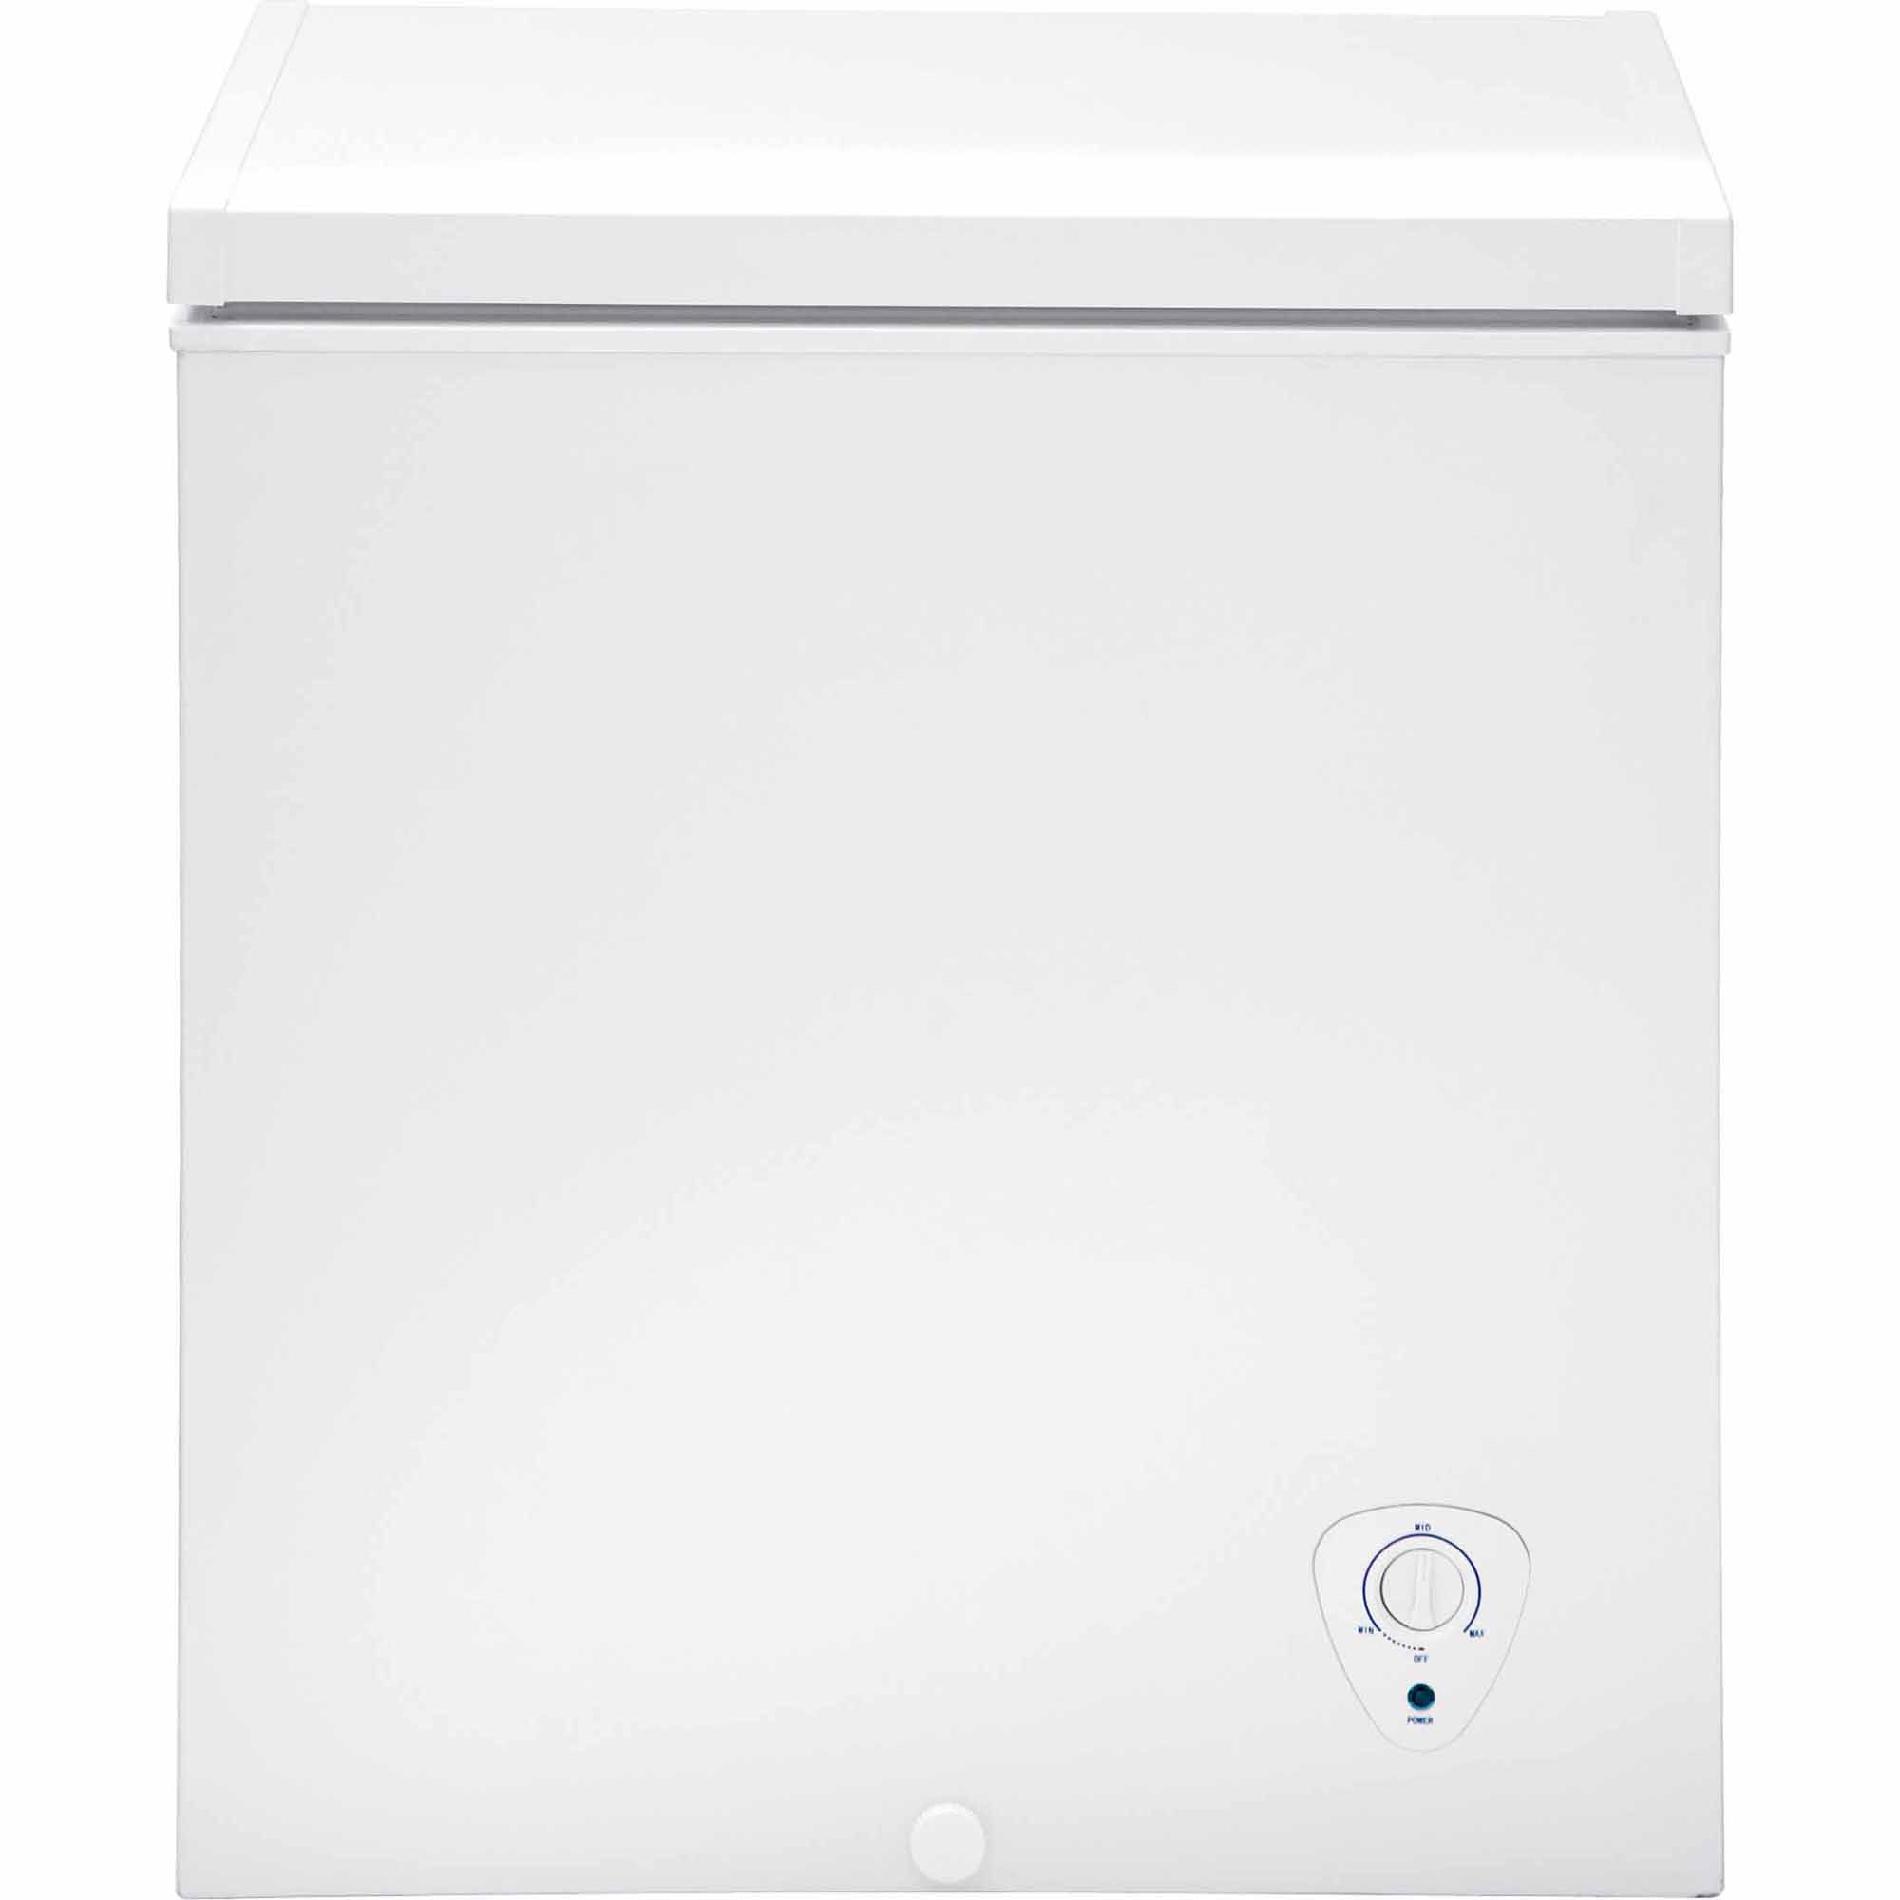 Kenmore 5.1 cu ft Chest Freezer Only $152.99!